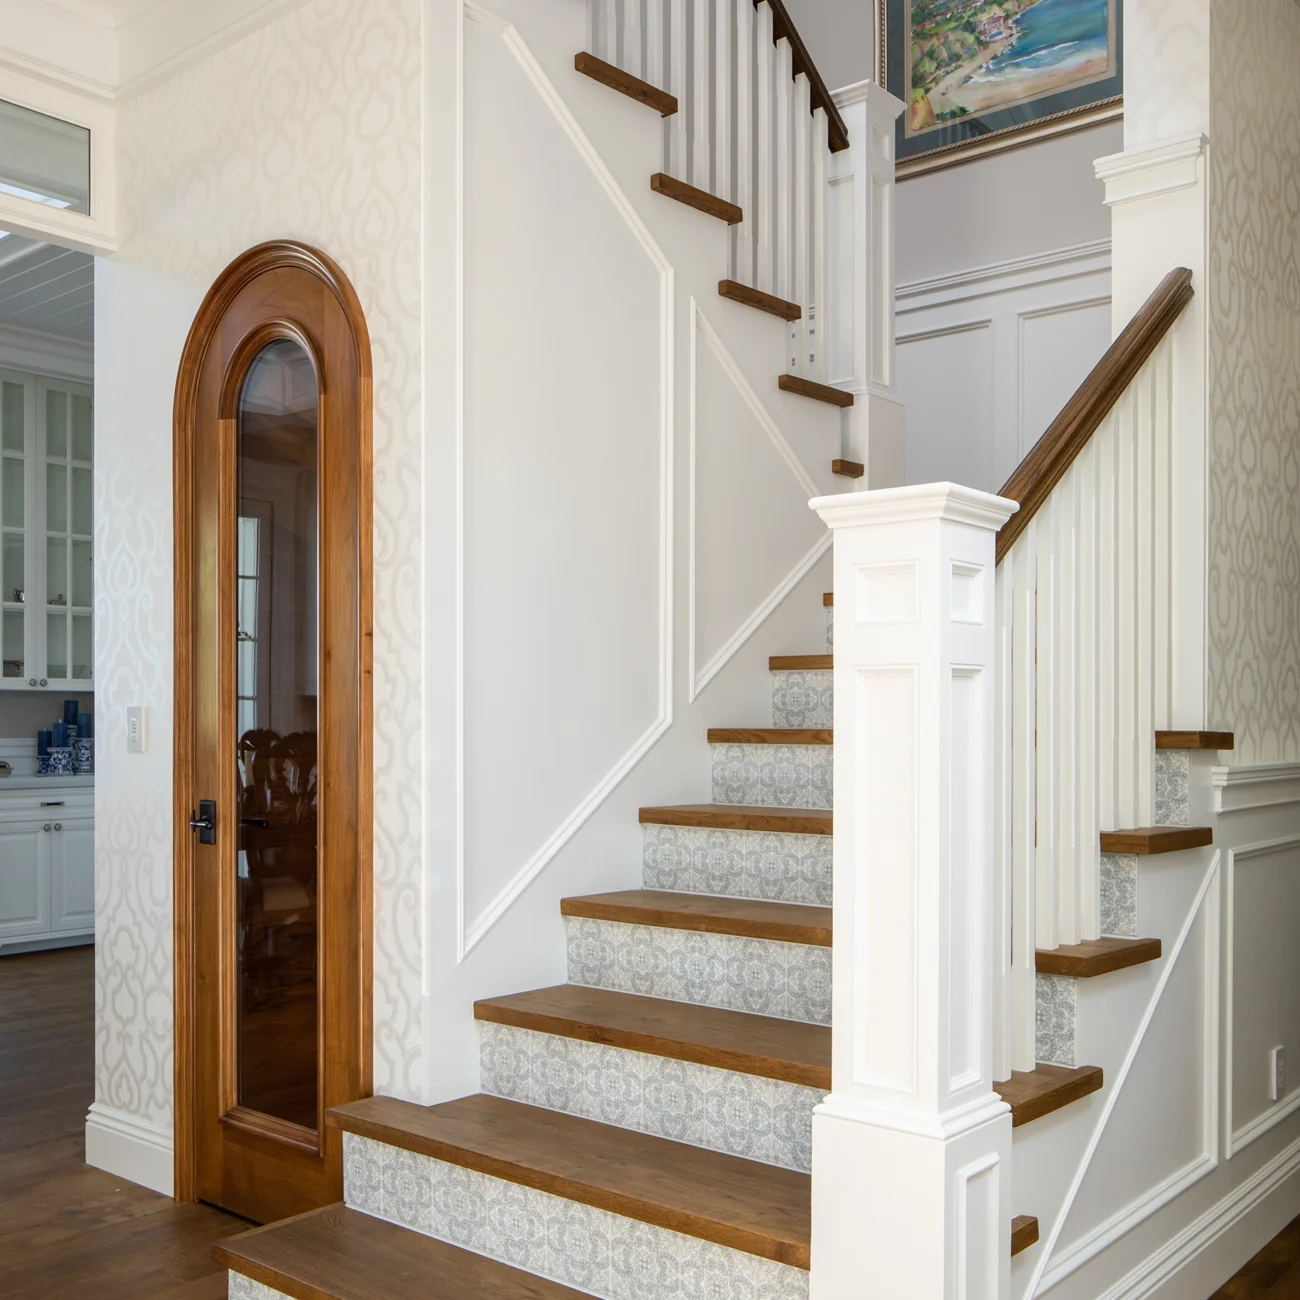 Christine Vroom Interiors Strawberry Lane | Traditional white stairwell and wood treads with accents